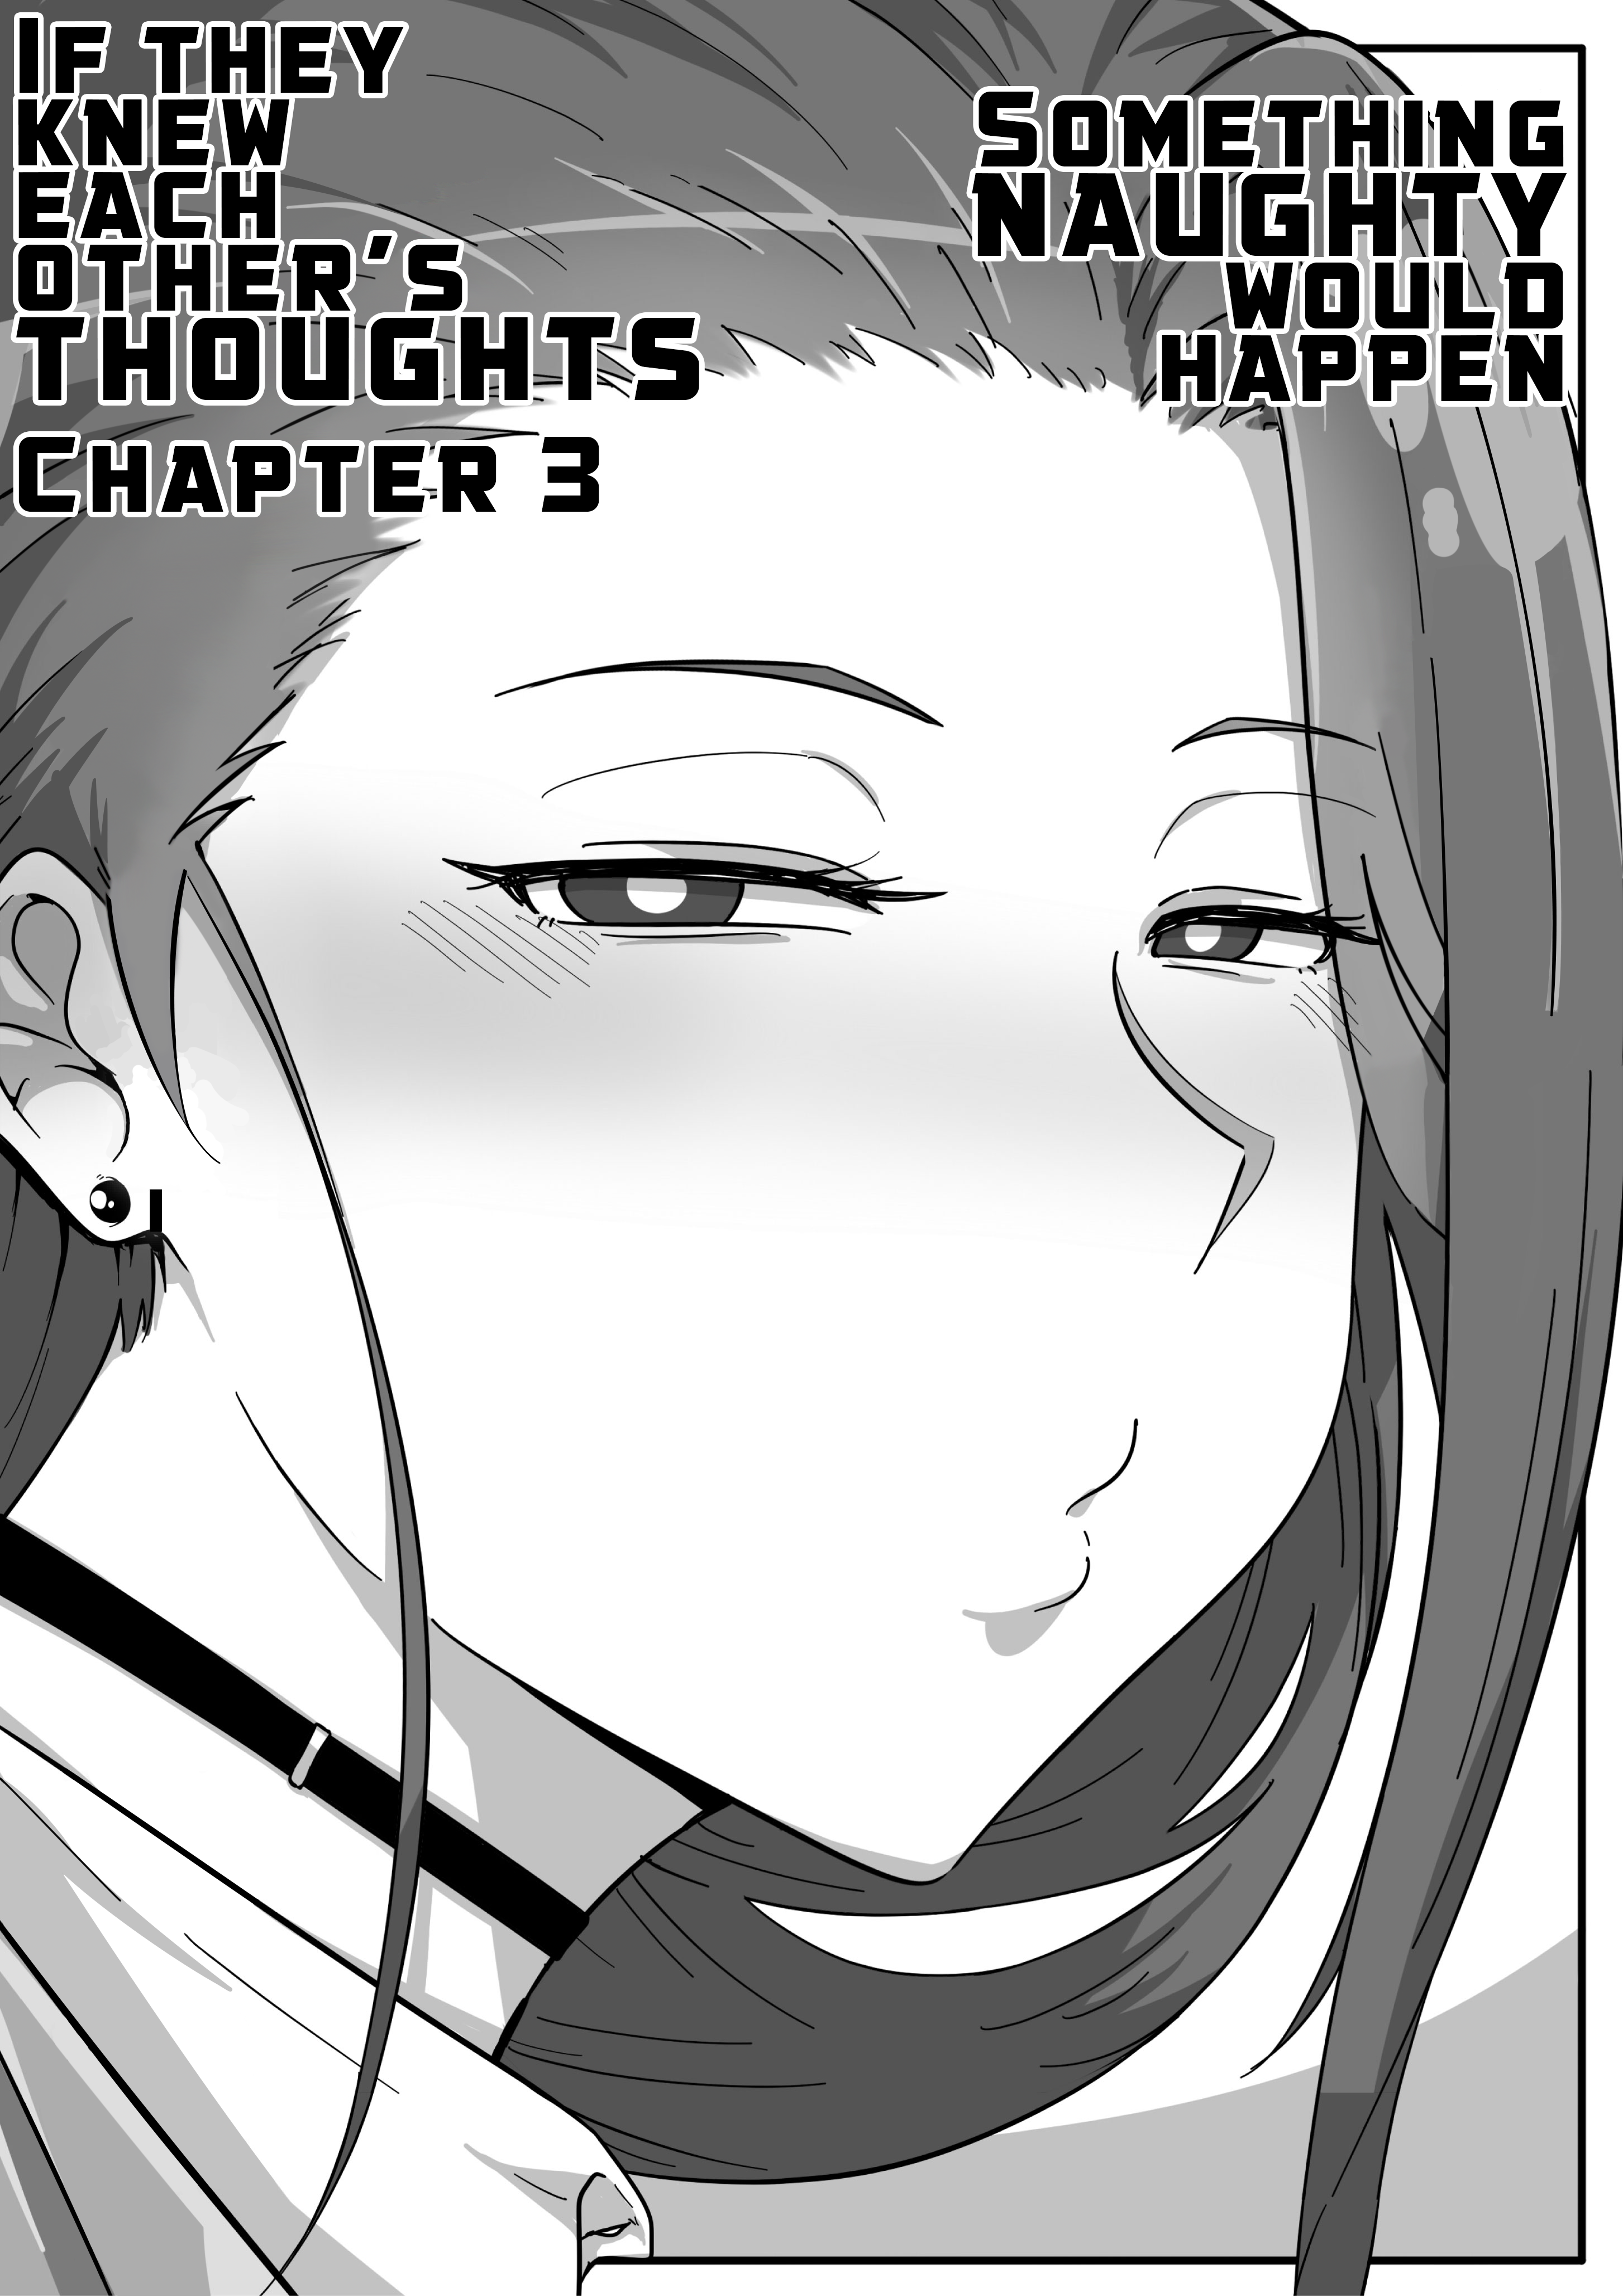 Something Naughty Would Happen If They Knew Each Other's Thoughts - chapter 3 - #2